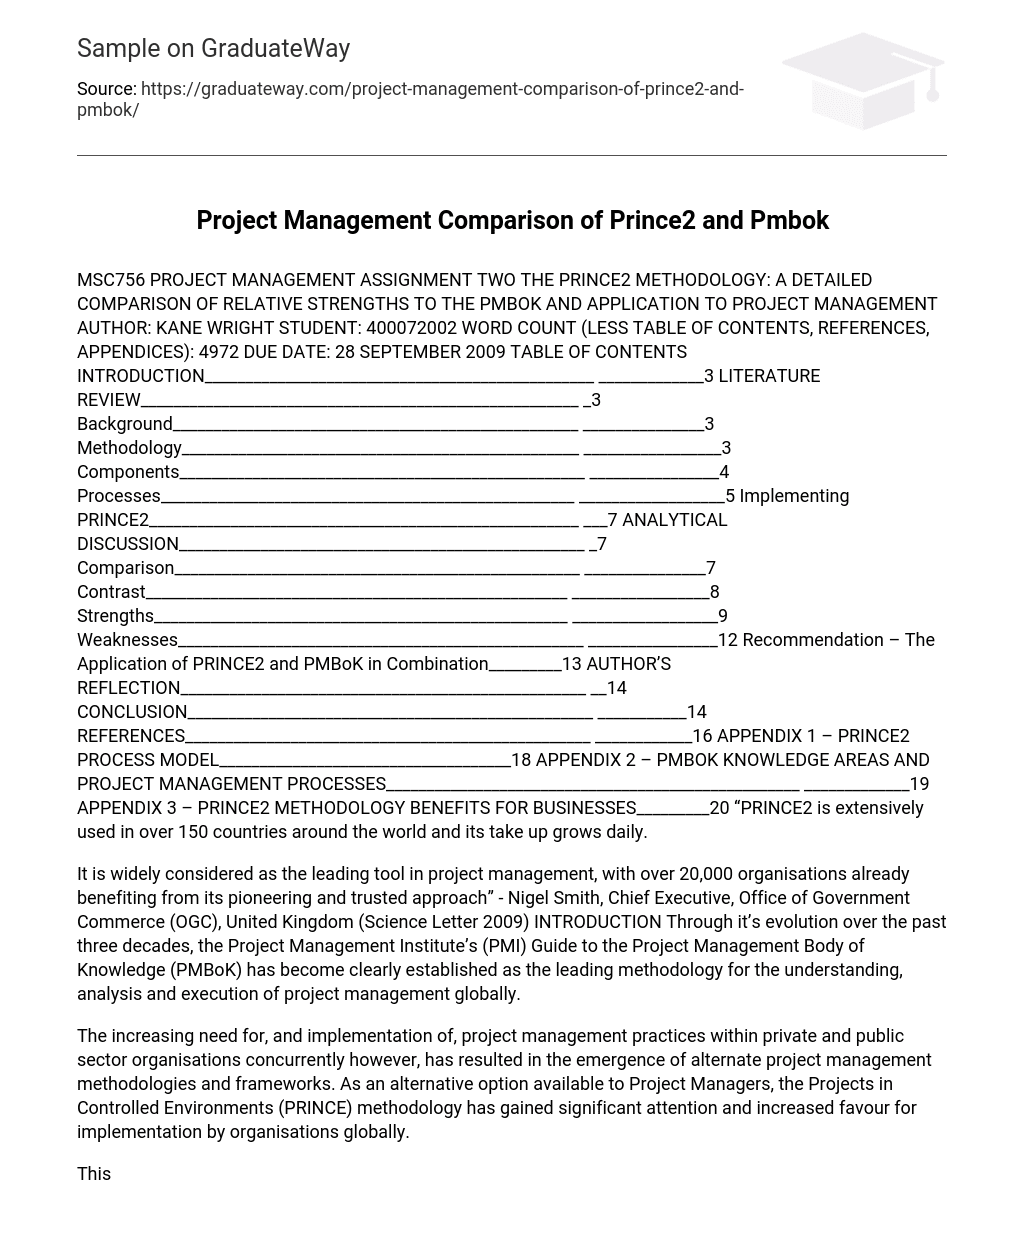 Project Management Comparison of Prince2 and Pmbok